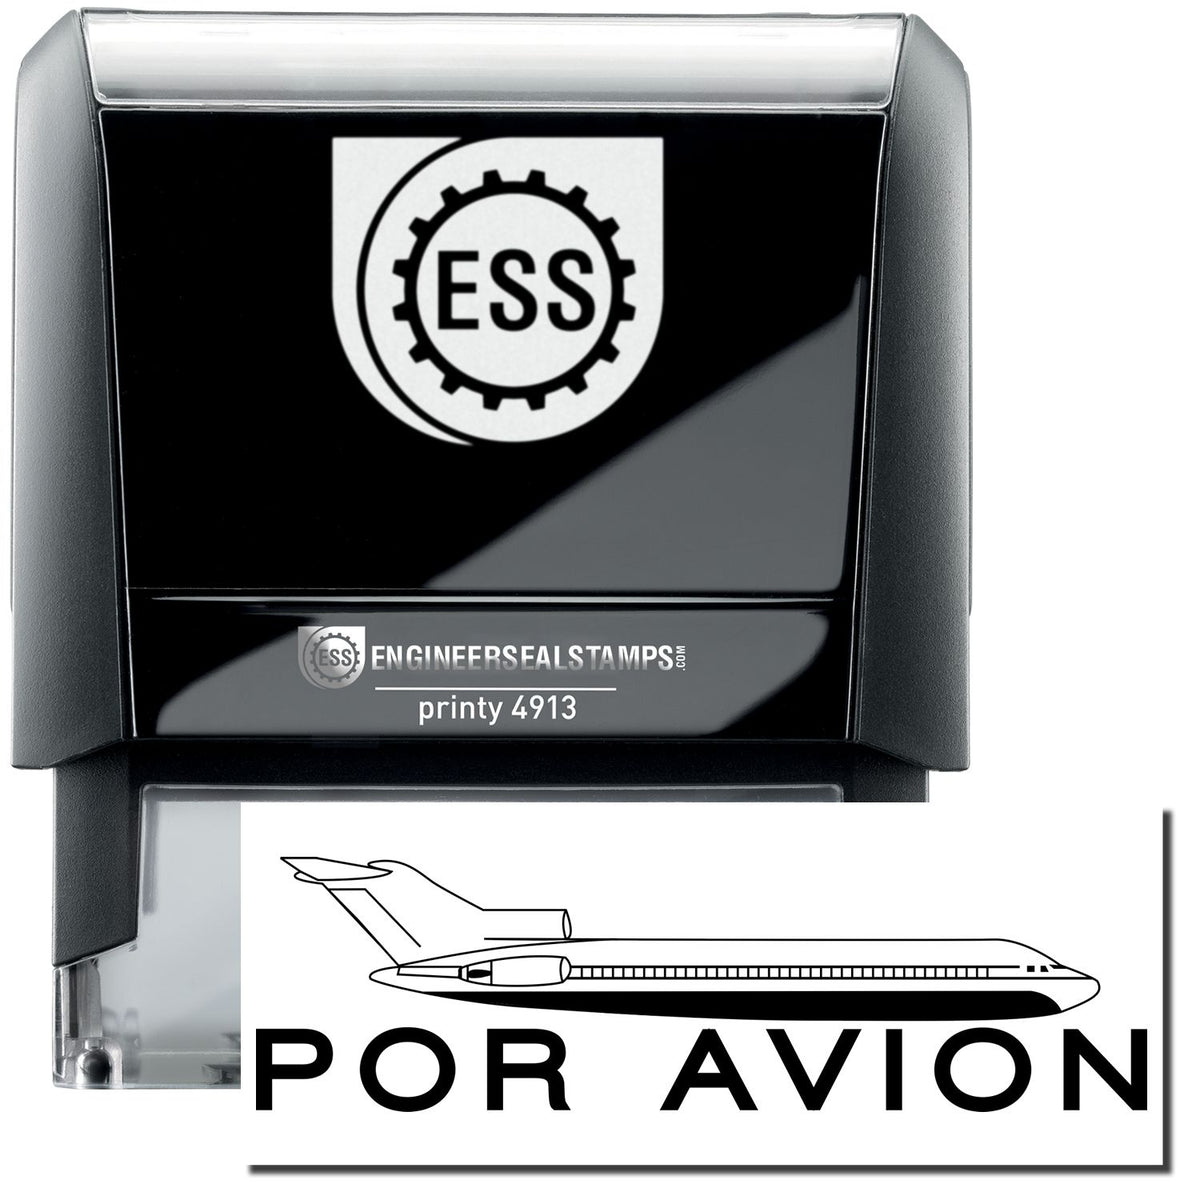 A self-inking stamp with a stamped image showing how the text &quot;POR AVION&quot; (with an airplane image above it) in a large font is displayed by it after stamping.